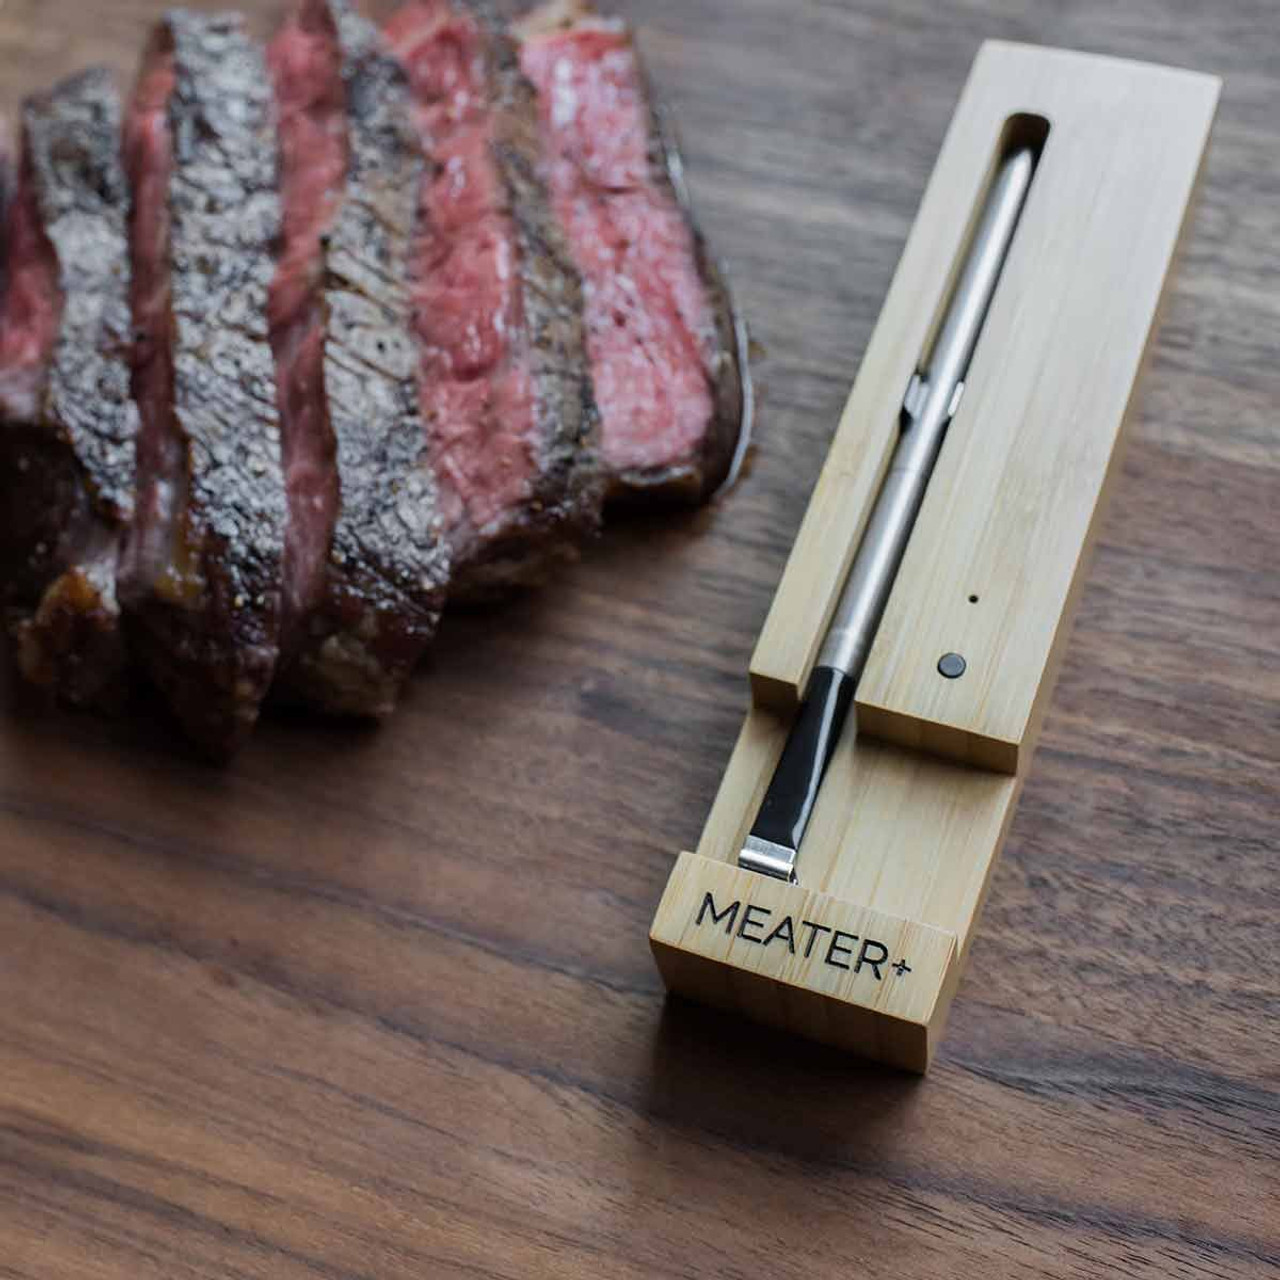 MEATER: The Only Wire-Free Smart Meat Thermometer